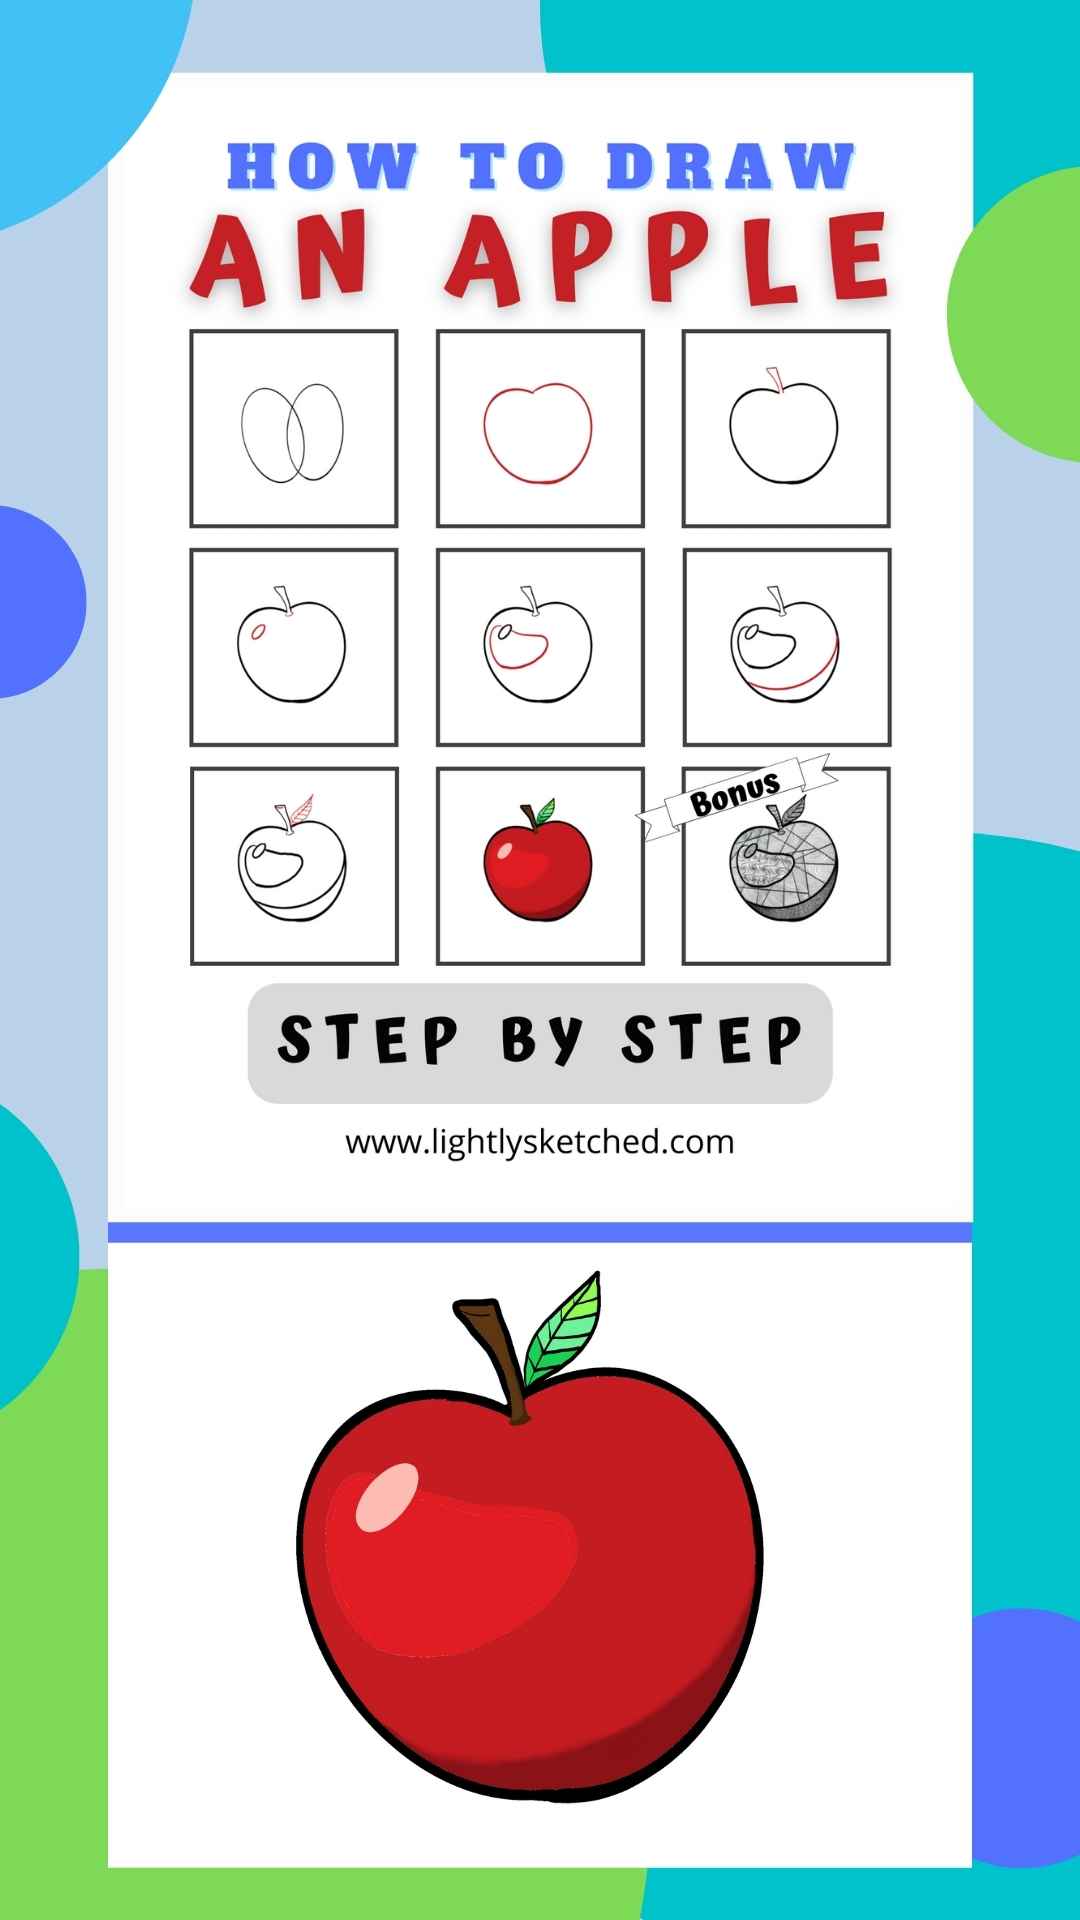 School Books And Apple Symbol Vector Illustration Sketch Royalty Free SVG,  Cliparts, Vectors, and Stock Illustration. Image 112383159.